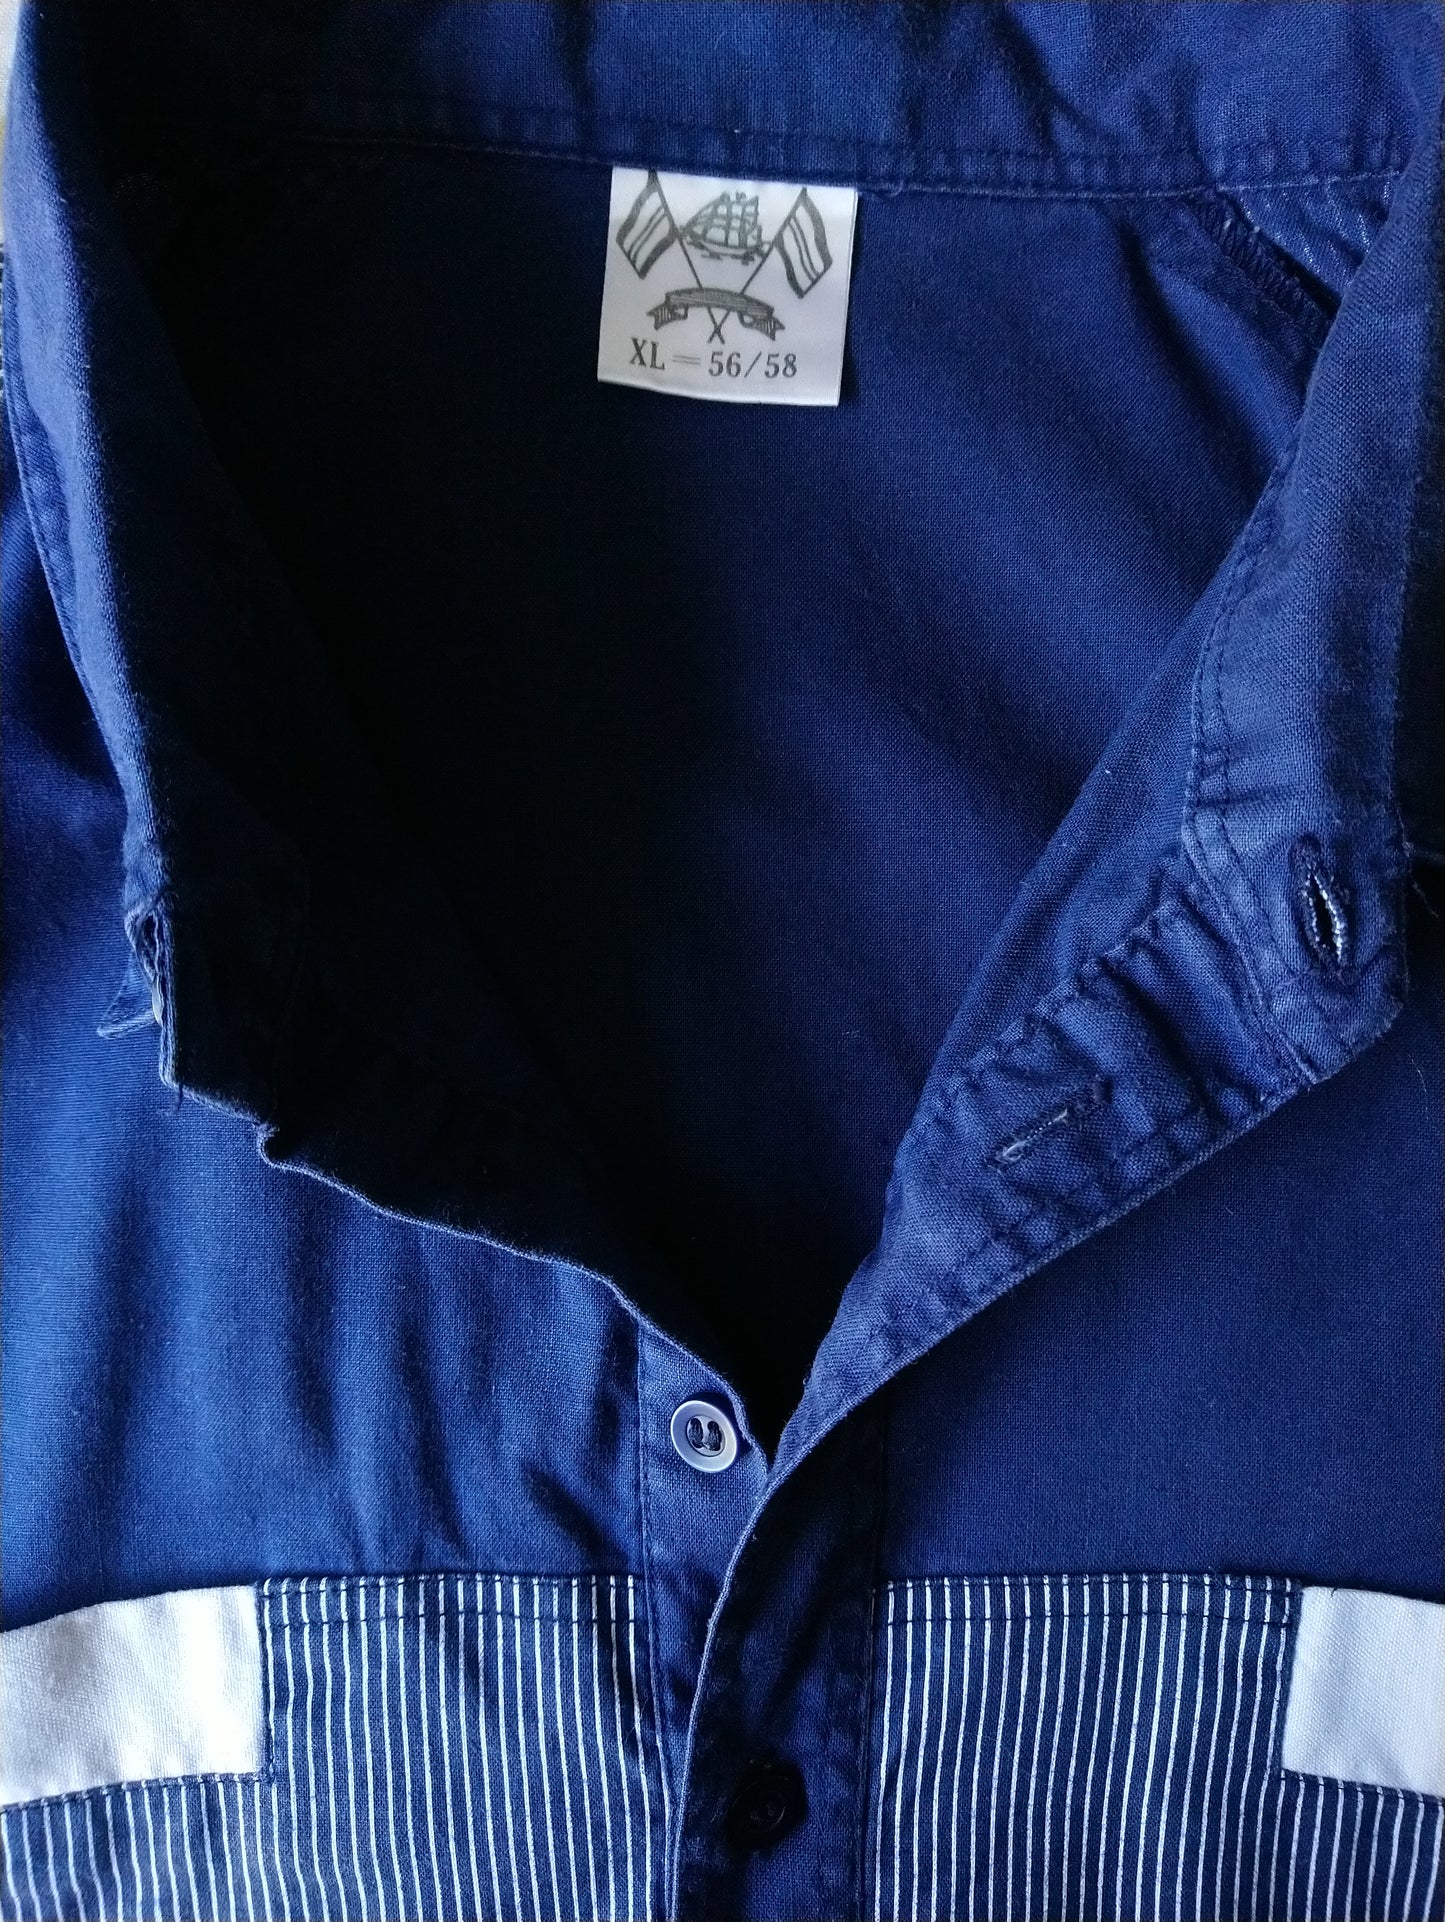 Vintage polo with elastic band. Blue white colored. Size XL / XXL-2XL.